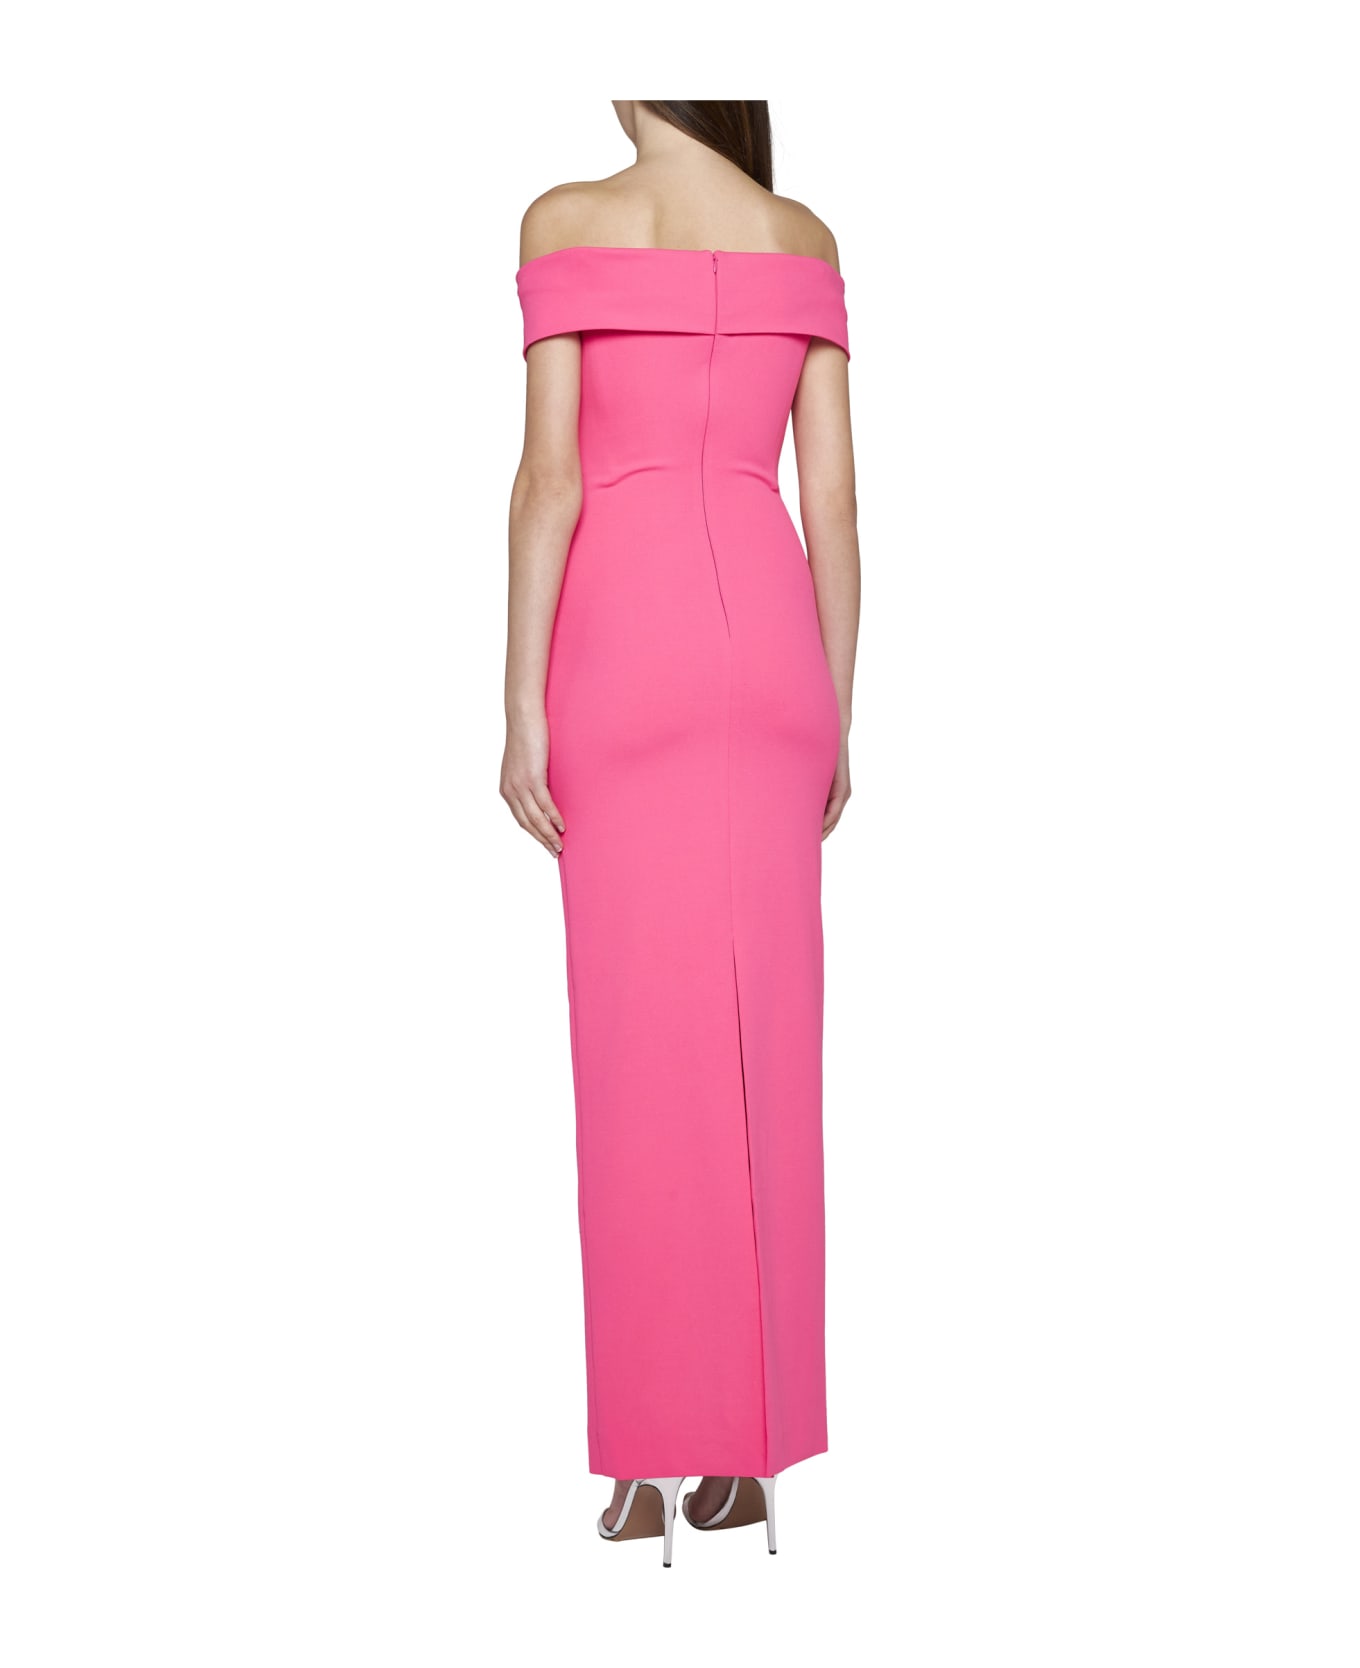 Solace London Ines Maxi Dress - Ultra pink